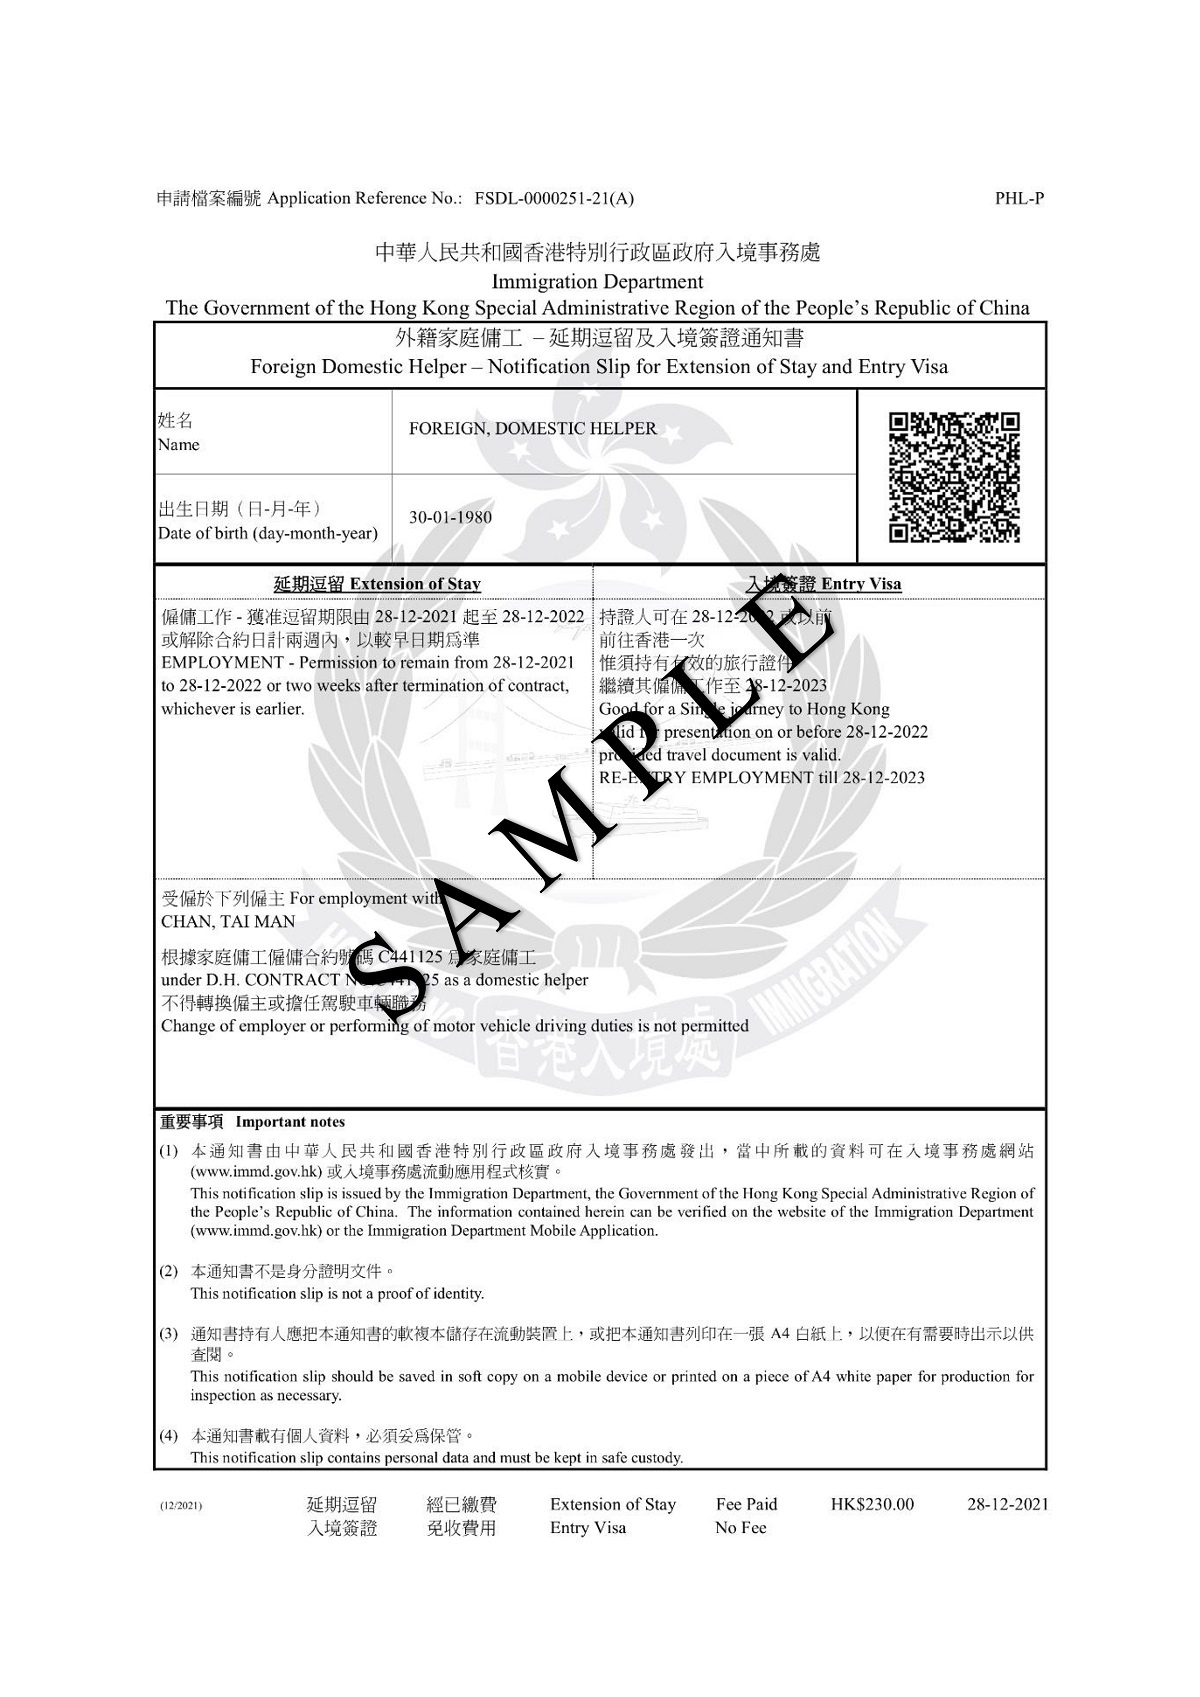 Foreign Domestic Helper – Notification Slip for Extension of Stay and Entry Visa (Sample)